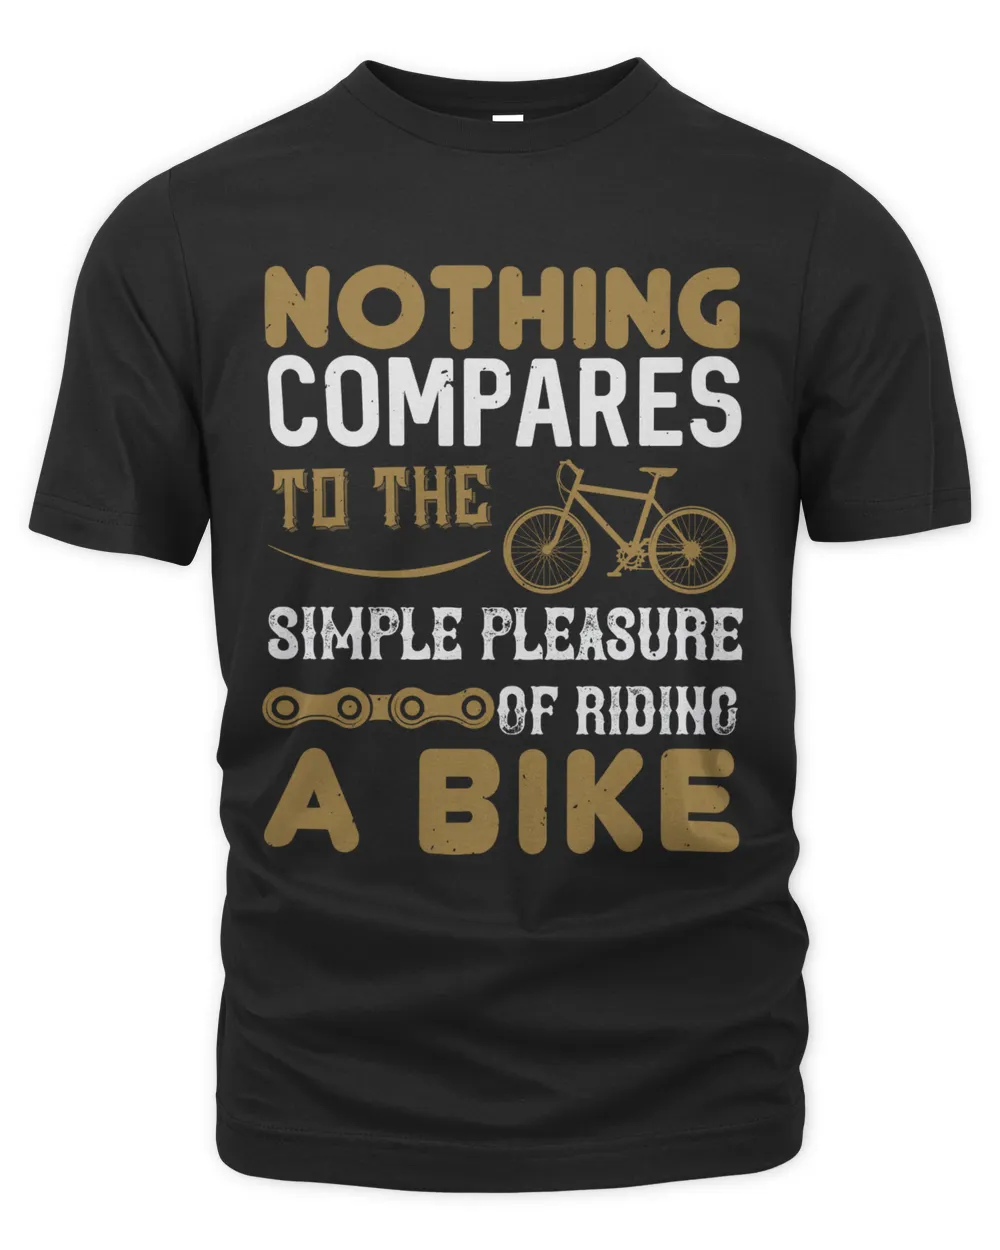 Nothing Compares To The Simple Pleasure Of Riding A Bike Bicycle Shirt, Cycling Shirt, Bicycle Shirt, Bike Gift, Bike Shirt, Bicycle Tshirt, Biking Shirt, Funny Cycling Shirt